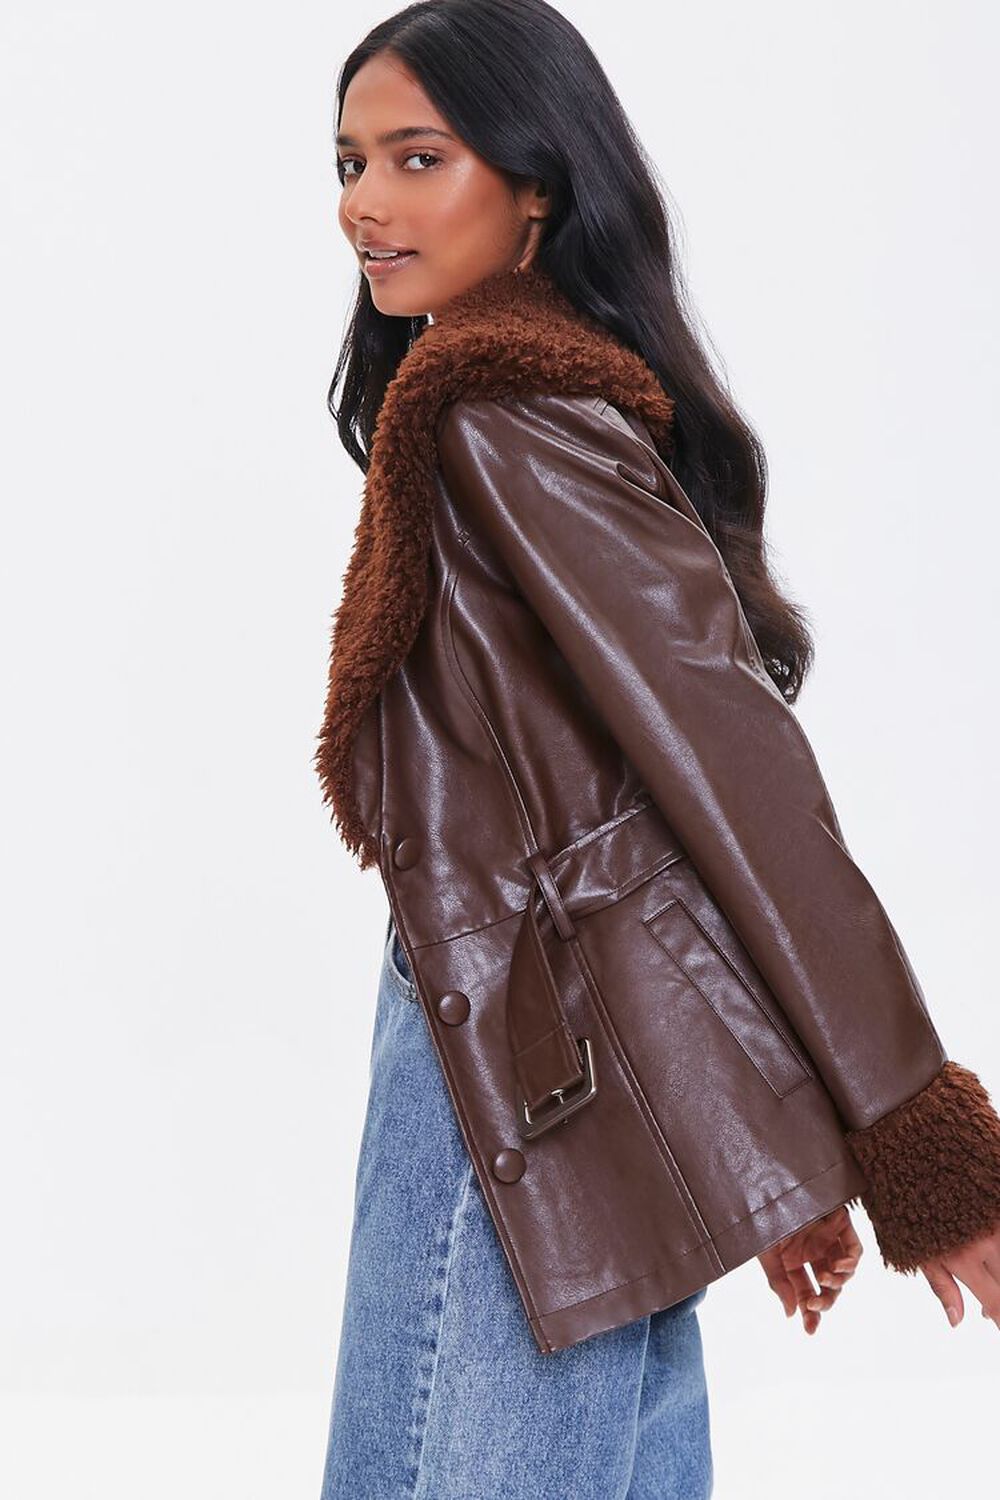 BROWN Faux Leather Belted Faux Shearling Jacket, image 2